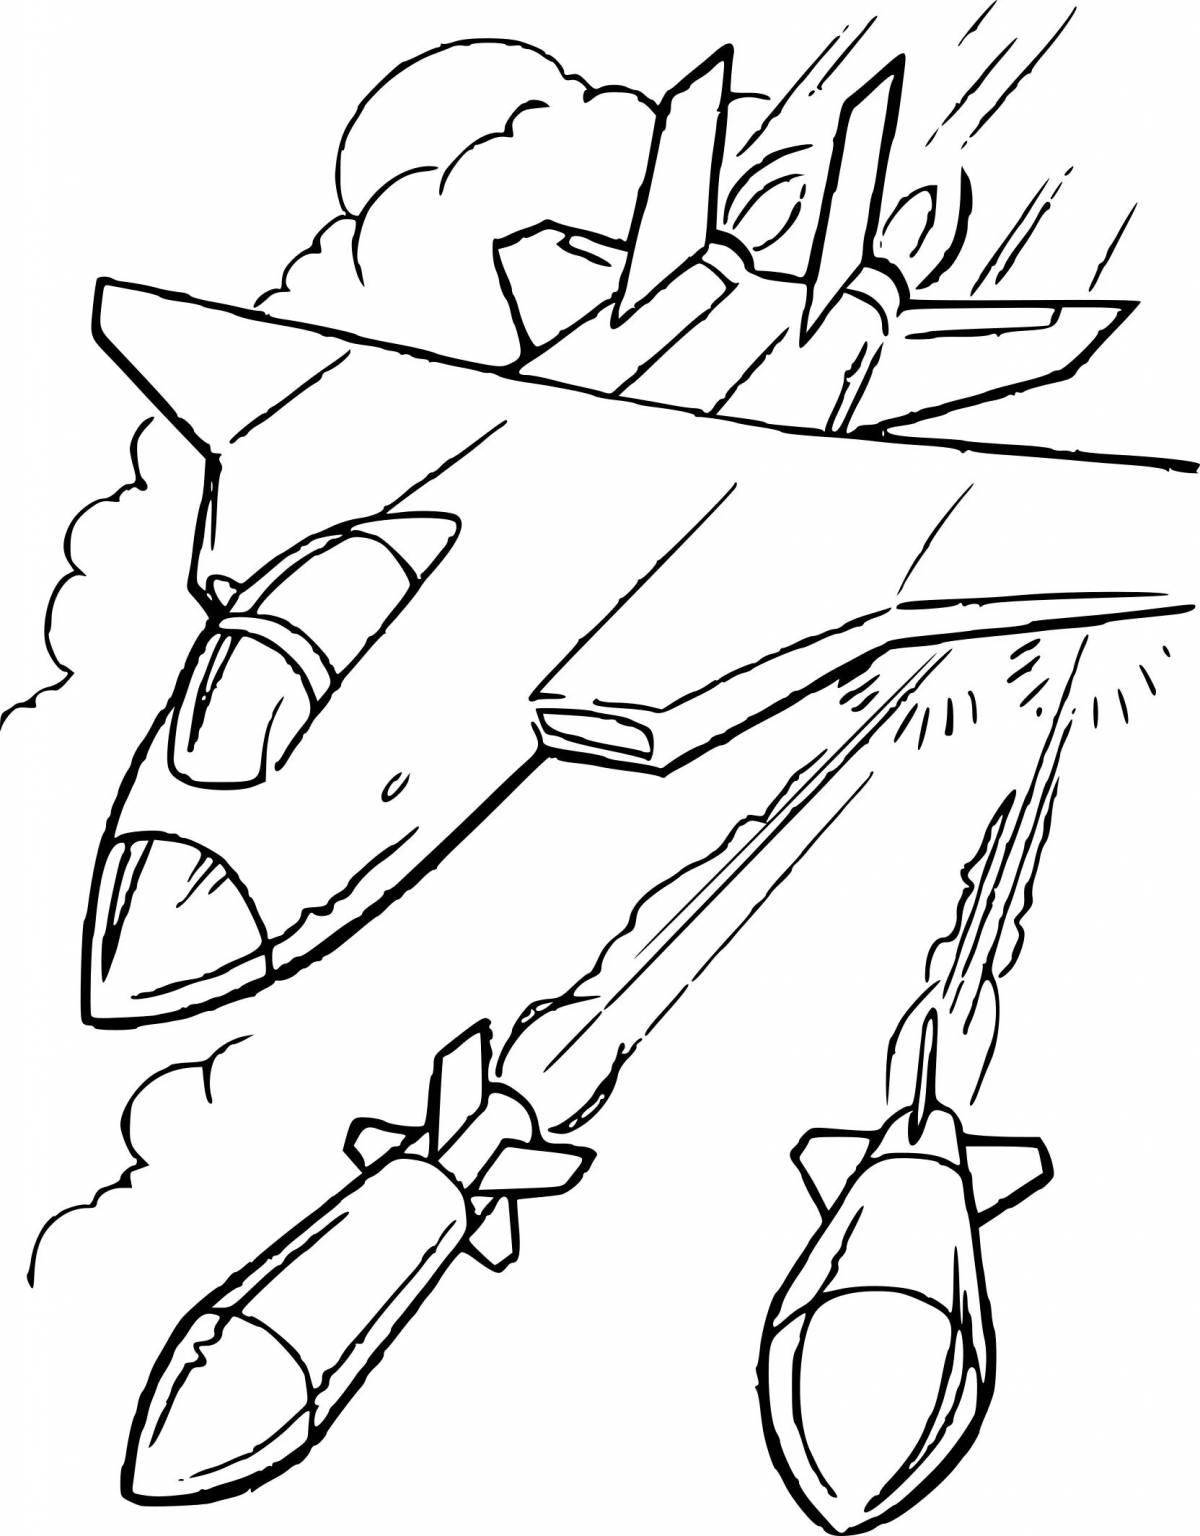 Royal military tanker flag coloring page